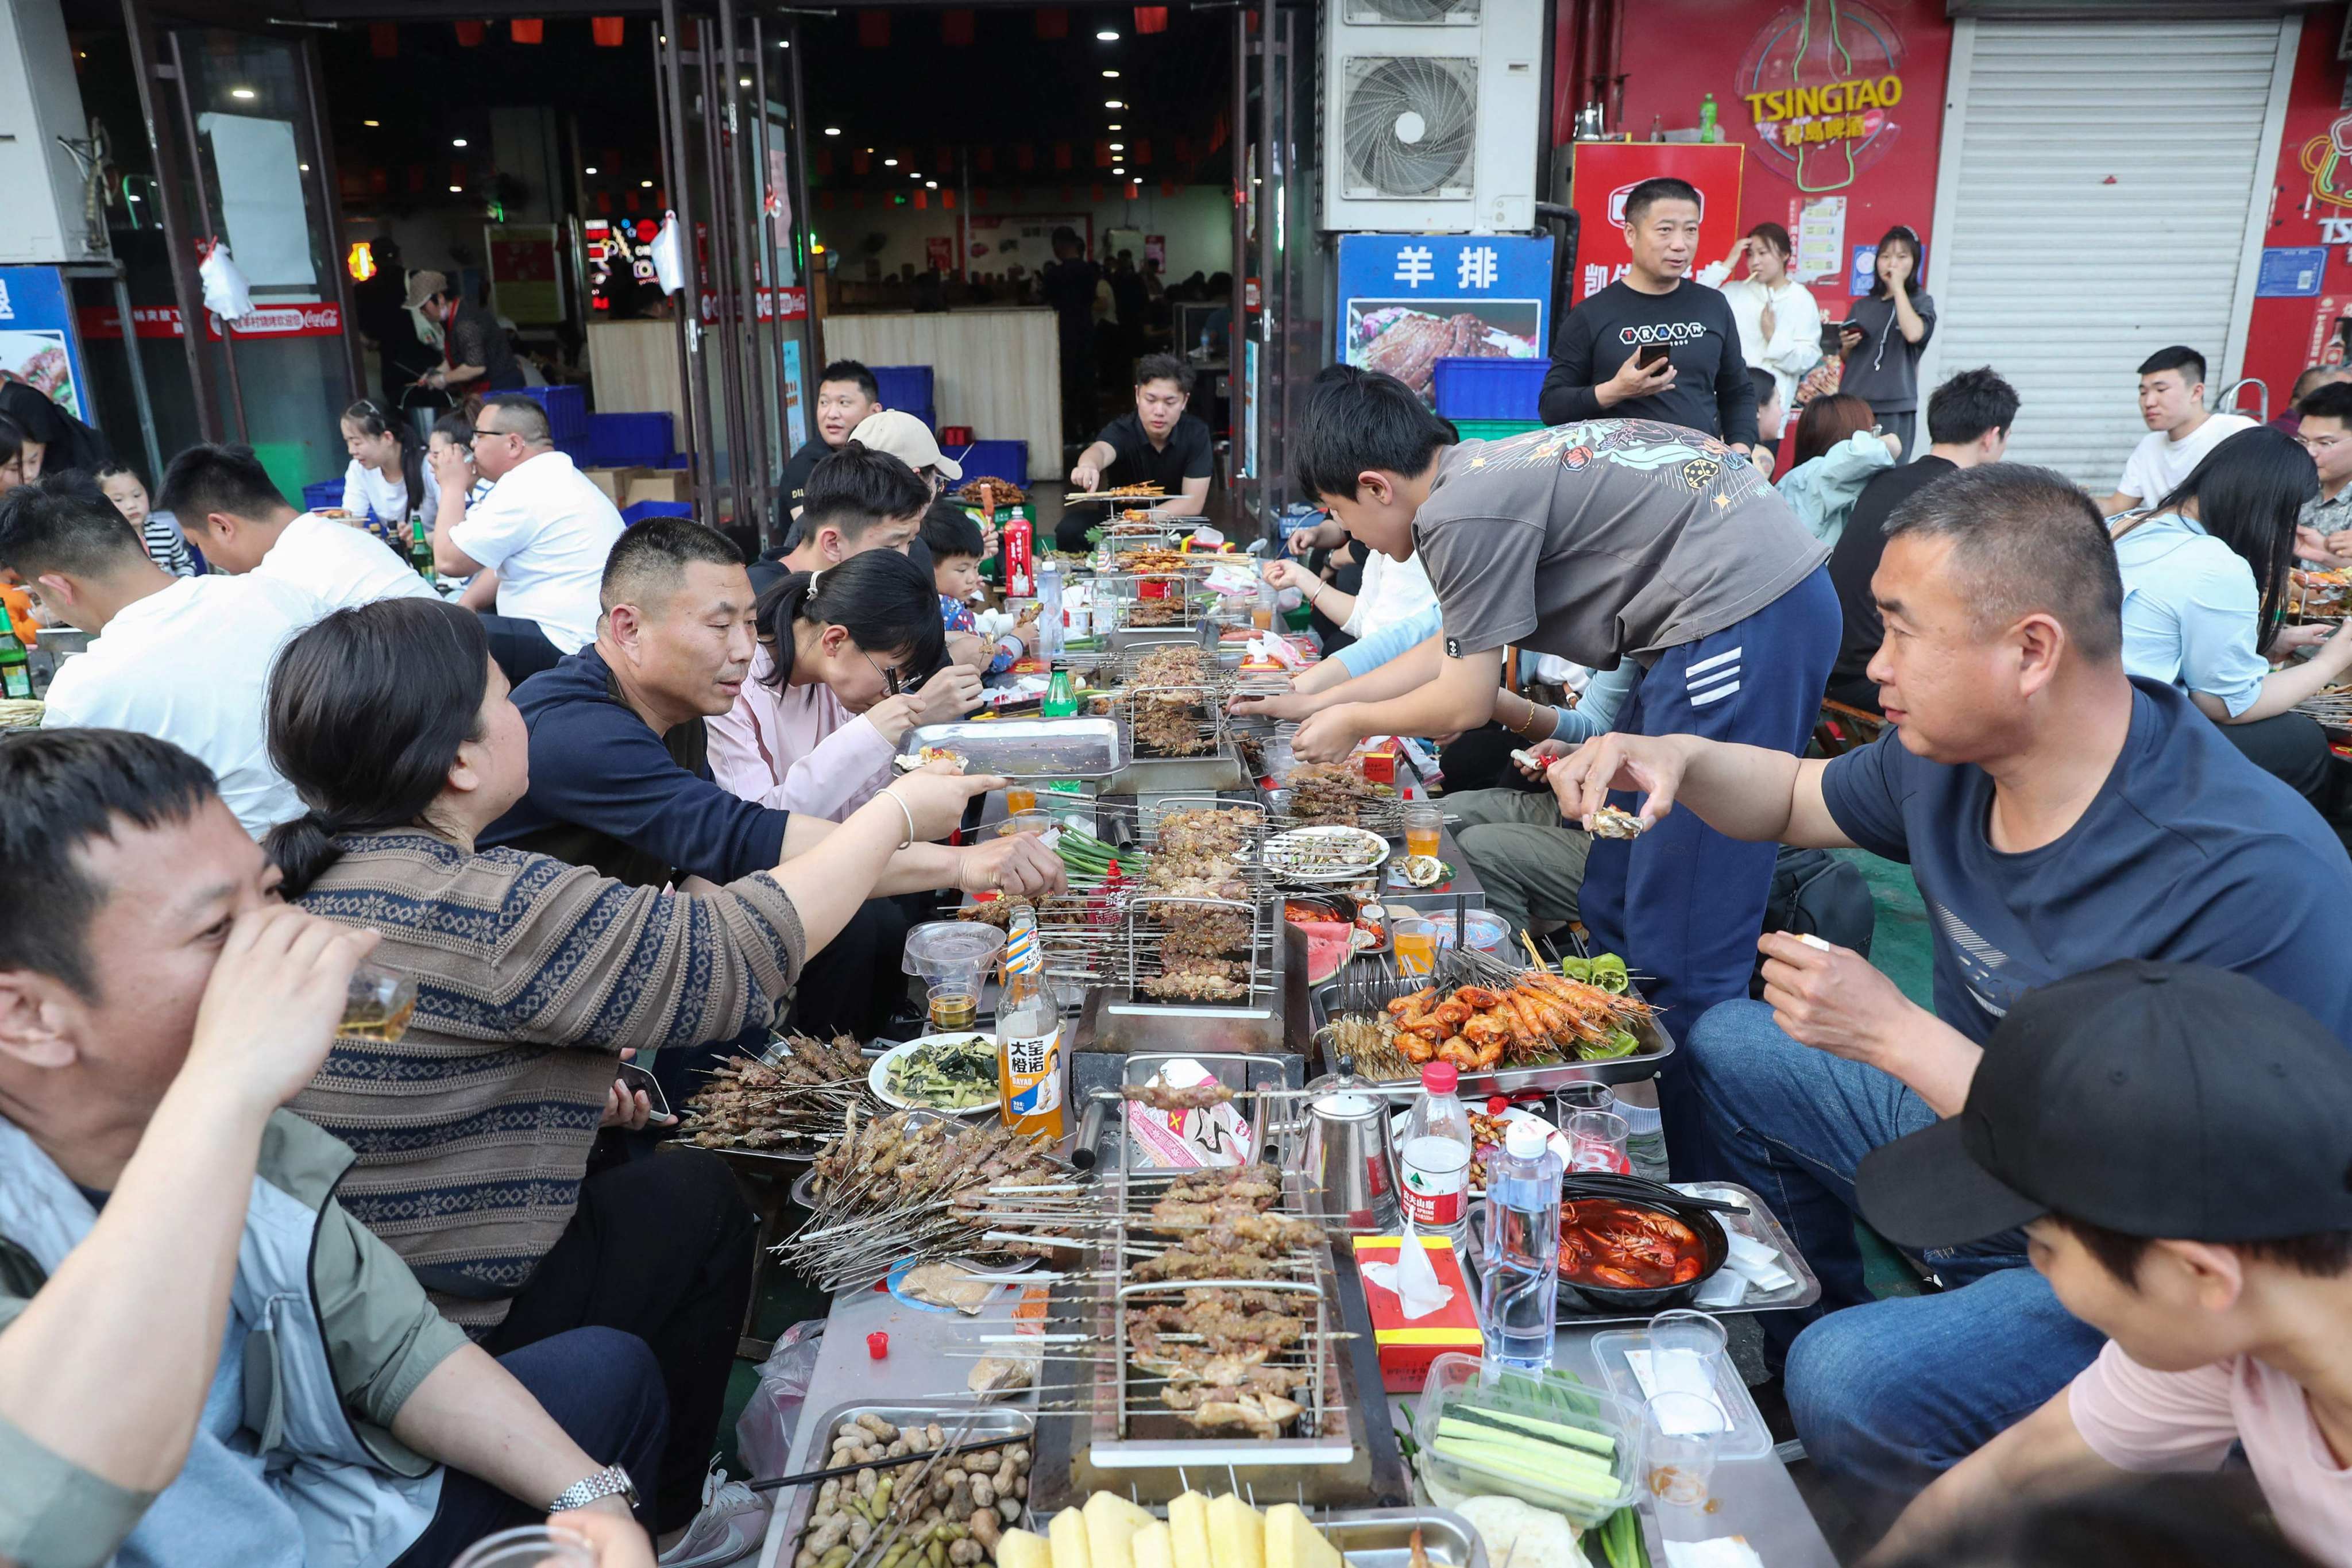 Government measures that encouraged more kerbside barbecue stalls to operate across China have proved ineffectual in boosting consumer spending. Photo: Agence France-Press